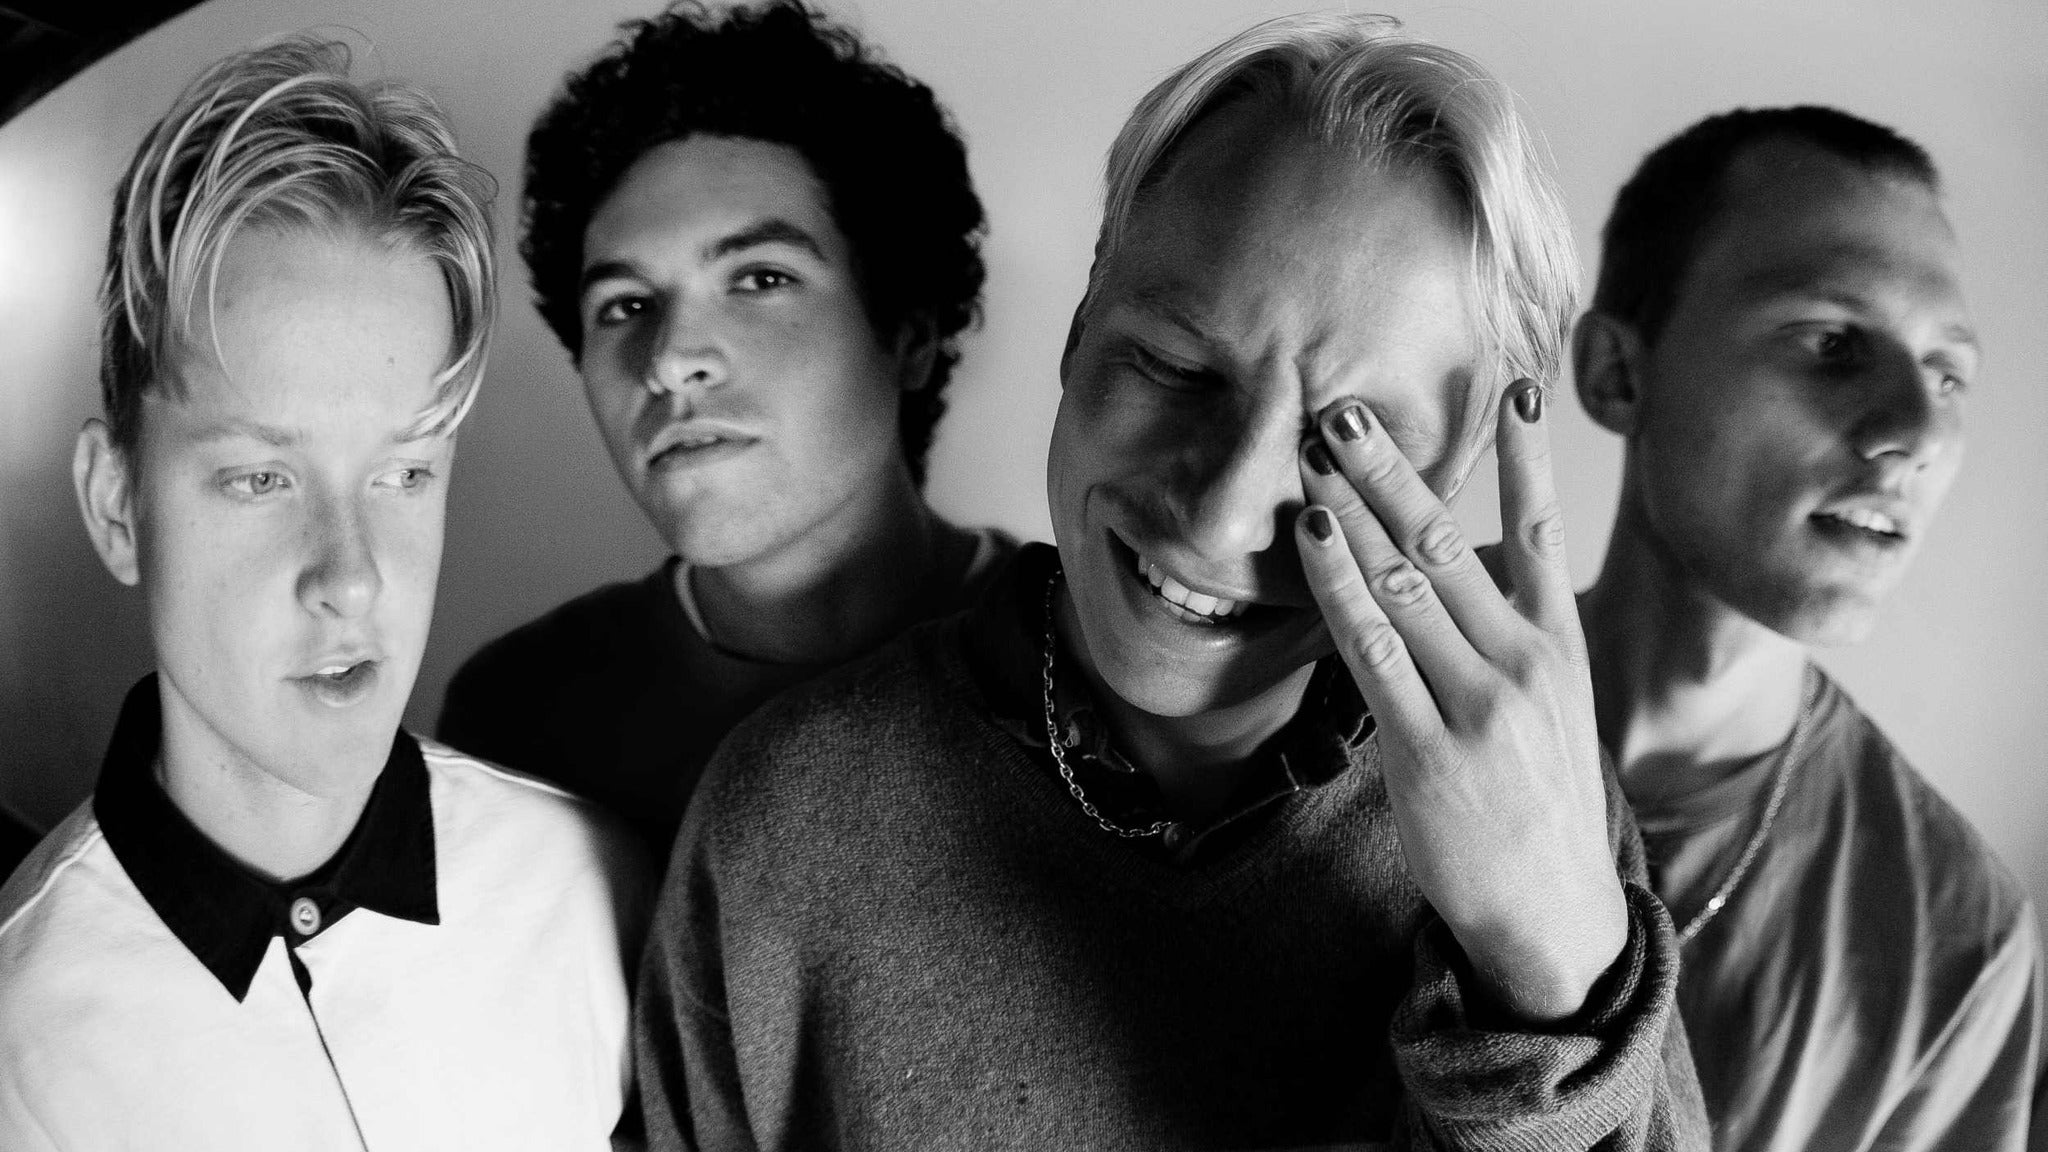 SWMRS in Chicago promo photo for Exclusive presale offer code